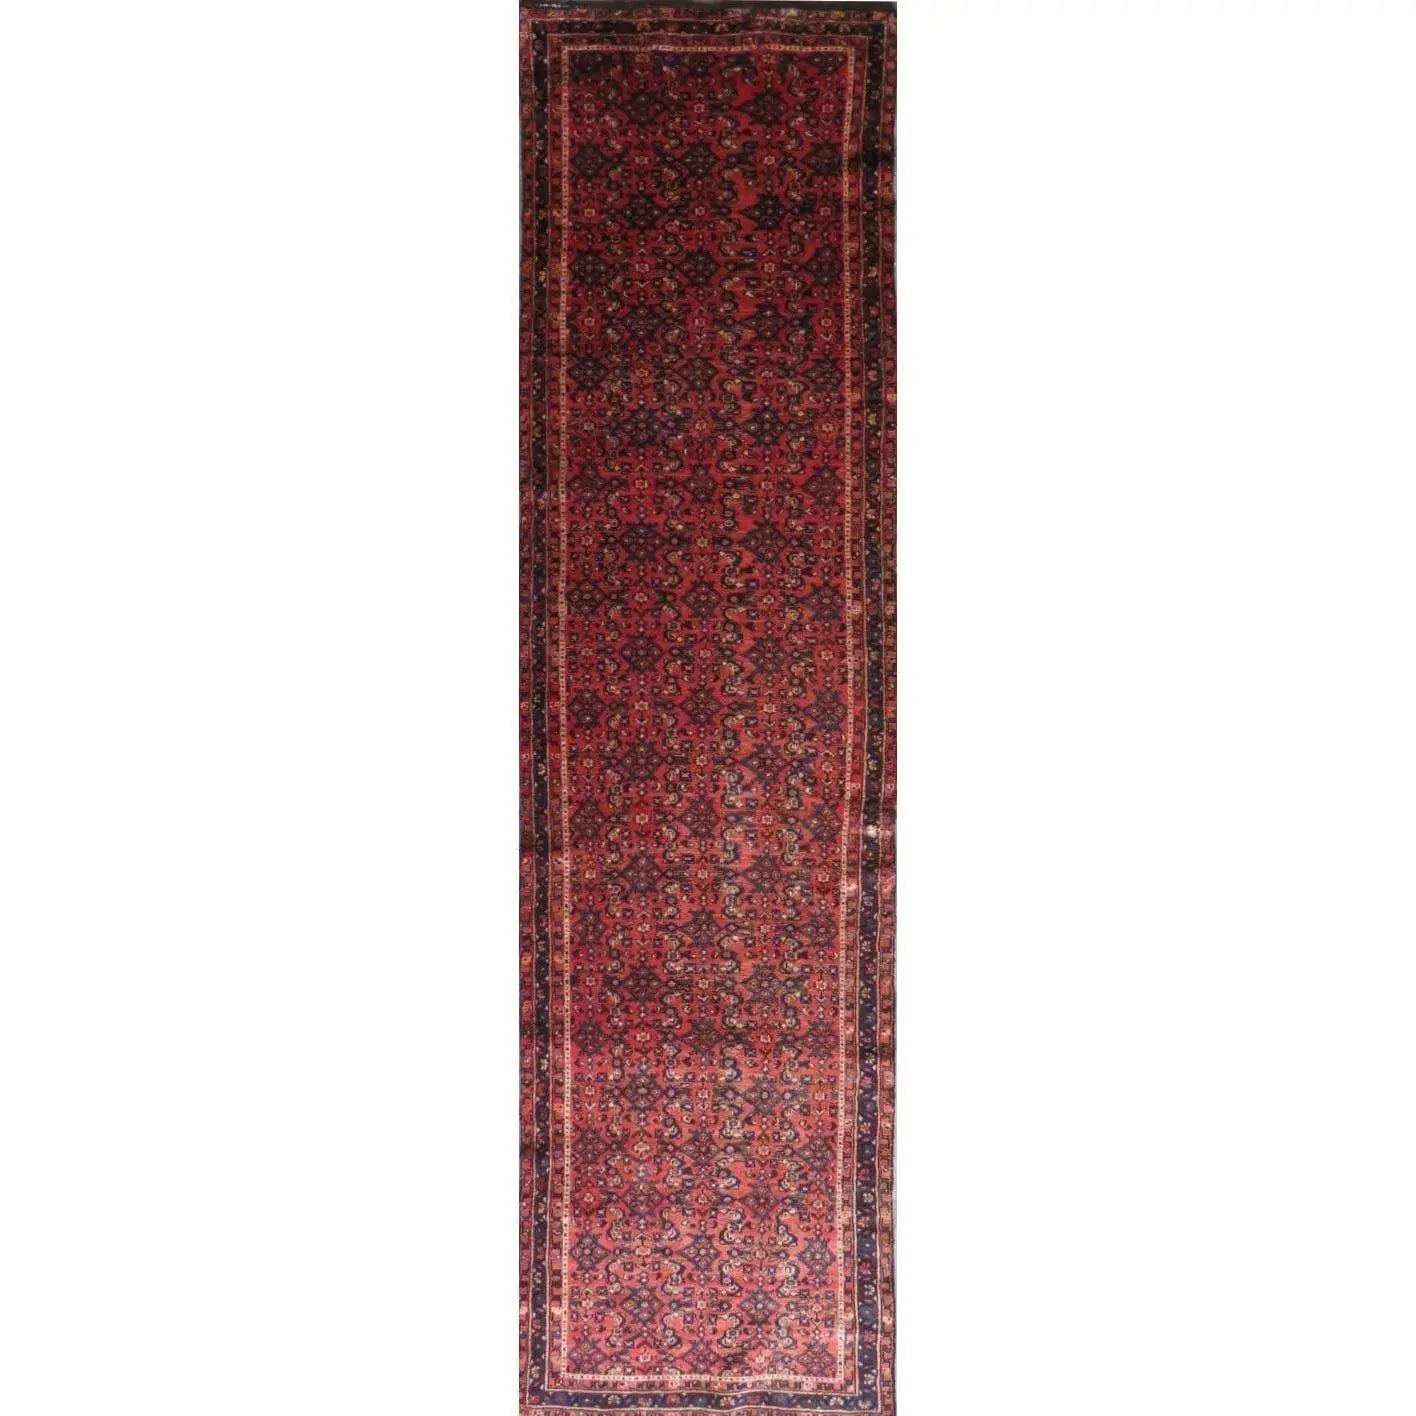 Hand-Knotted Vintage Rug 12'9" x 3'3"